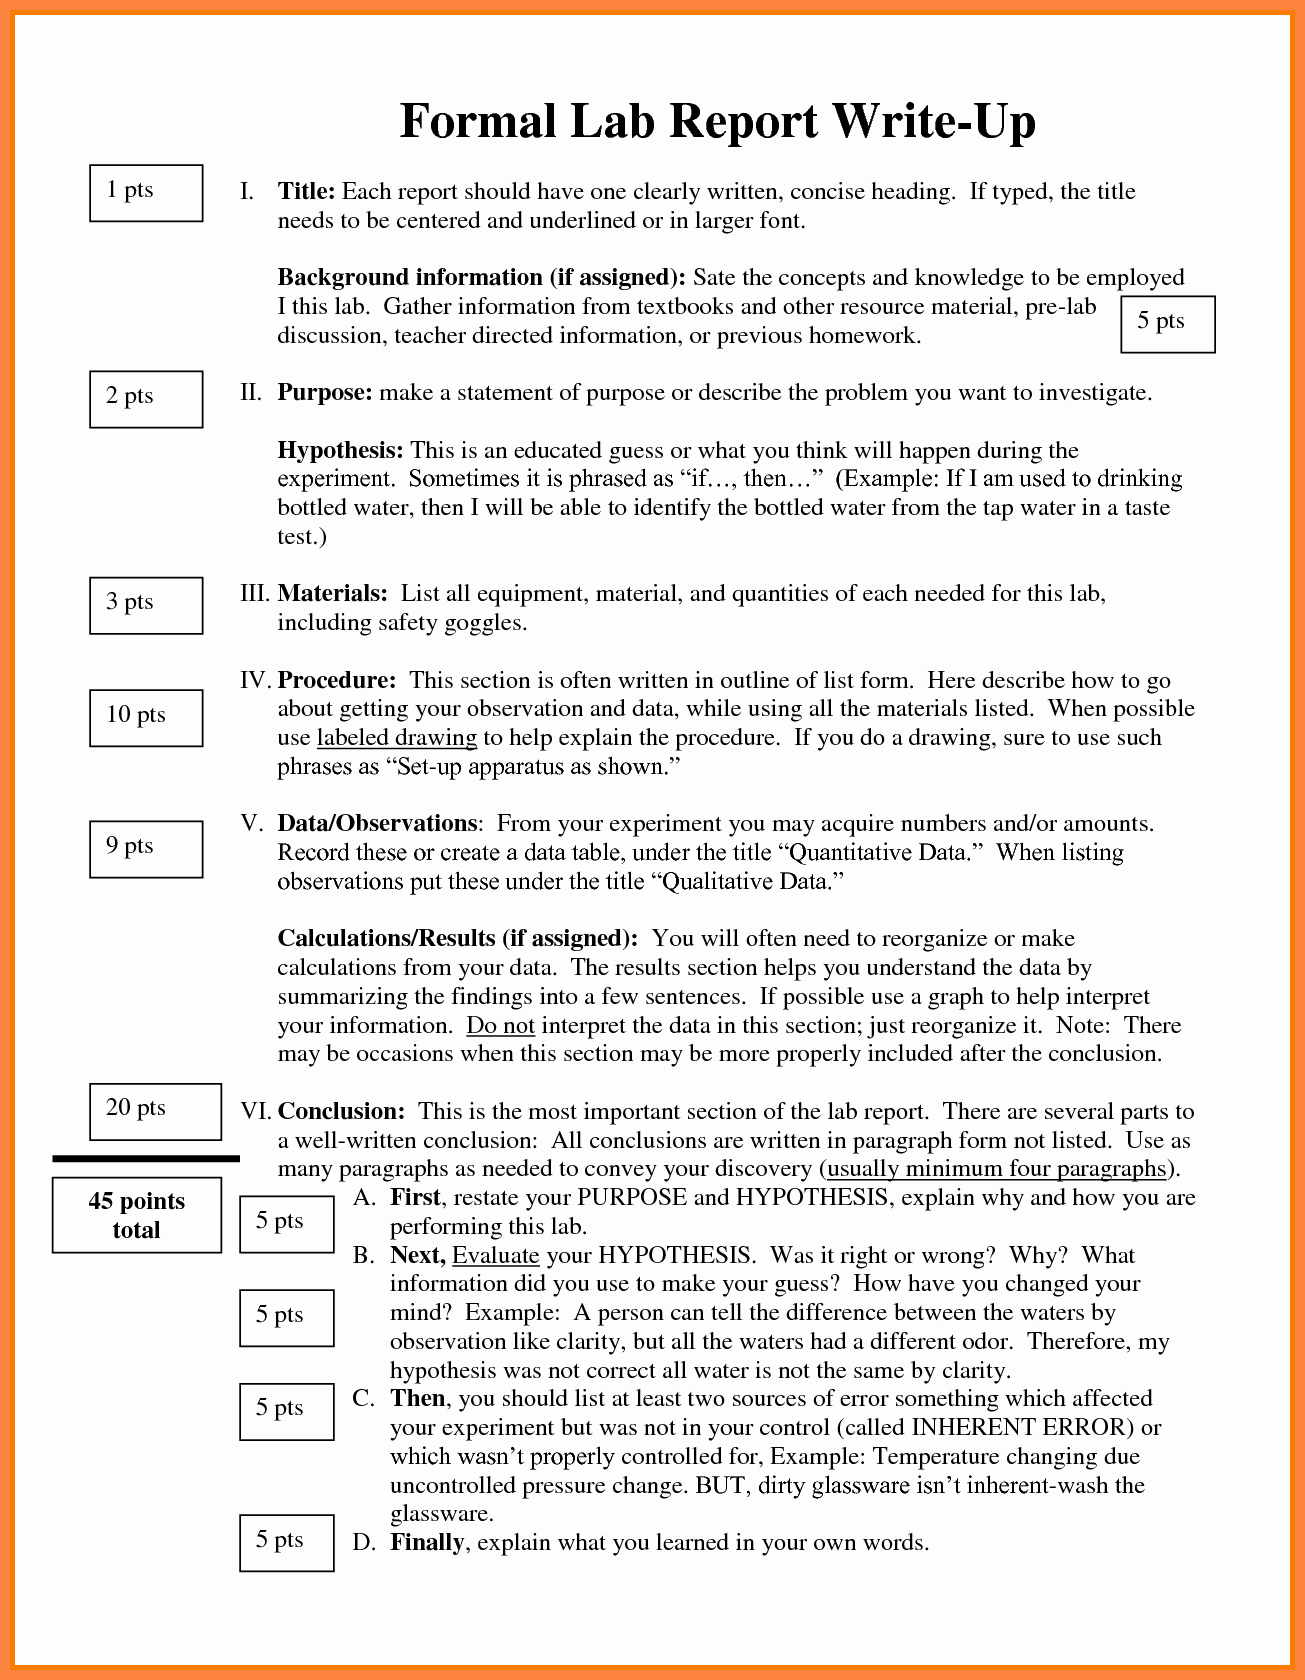 Formal Lab Report Template Fresh 8 formal Lab Report Example